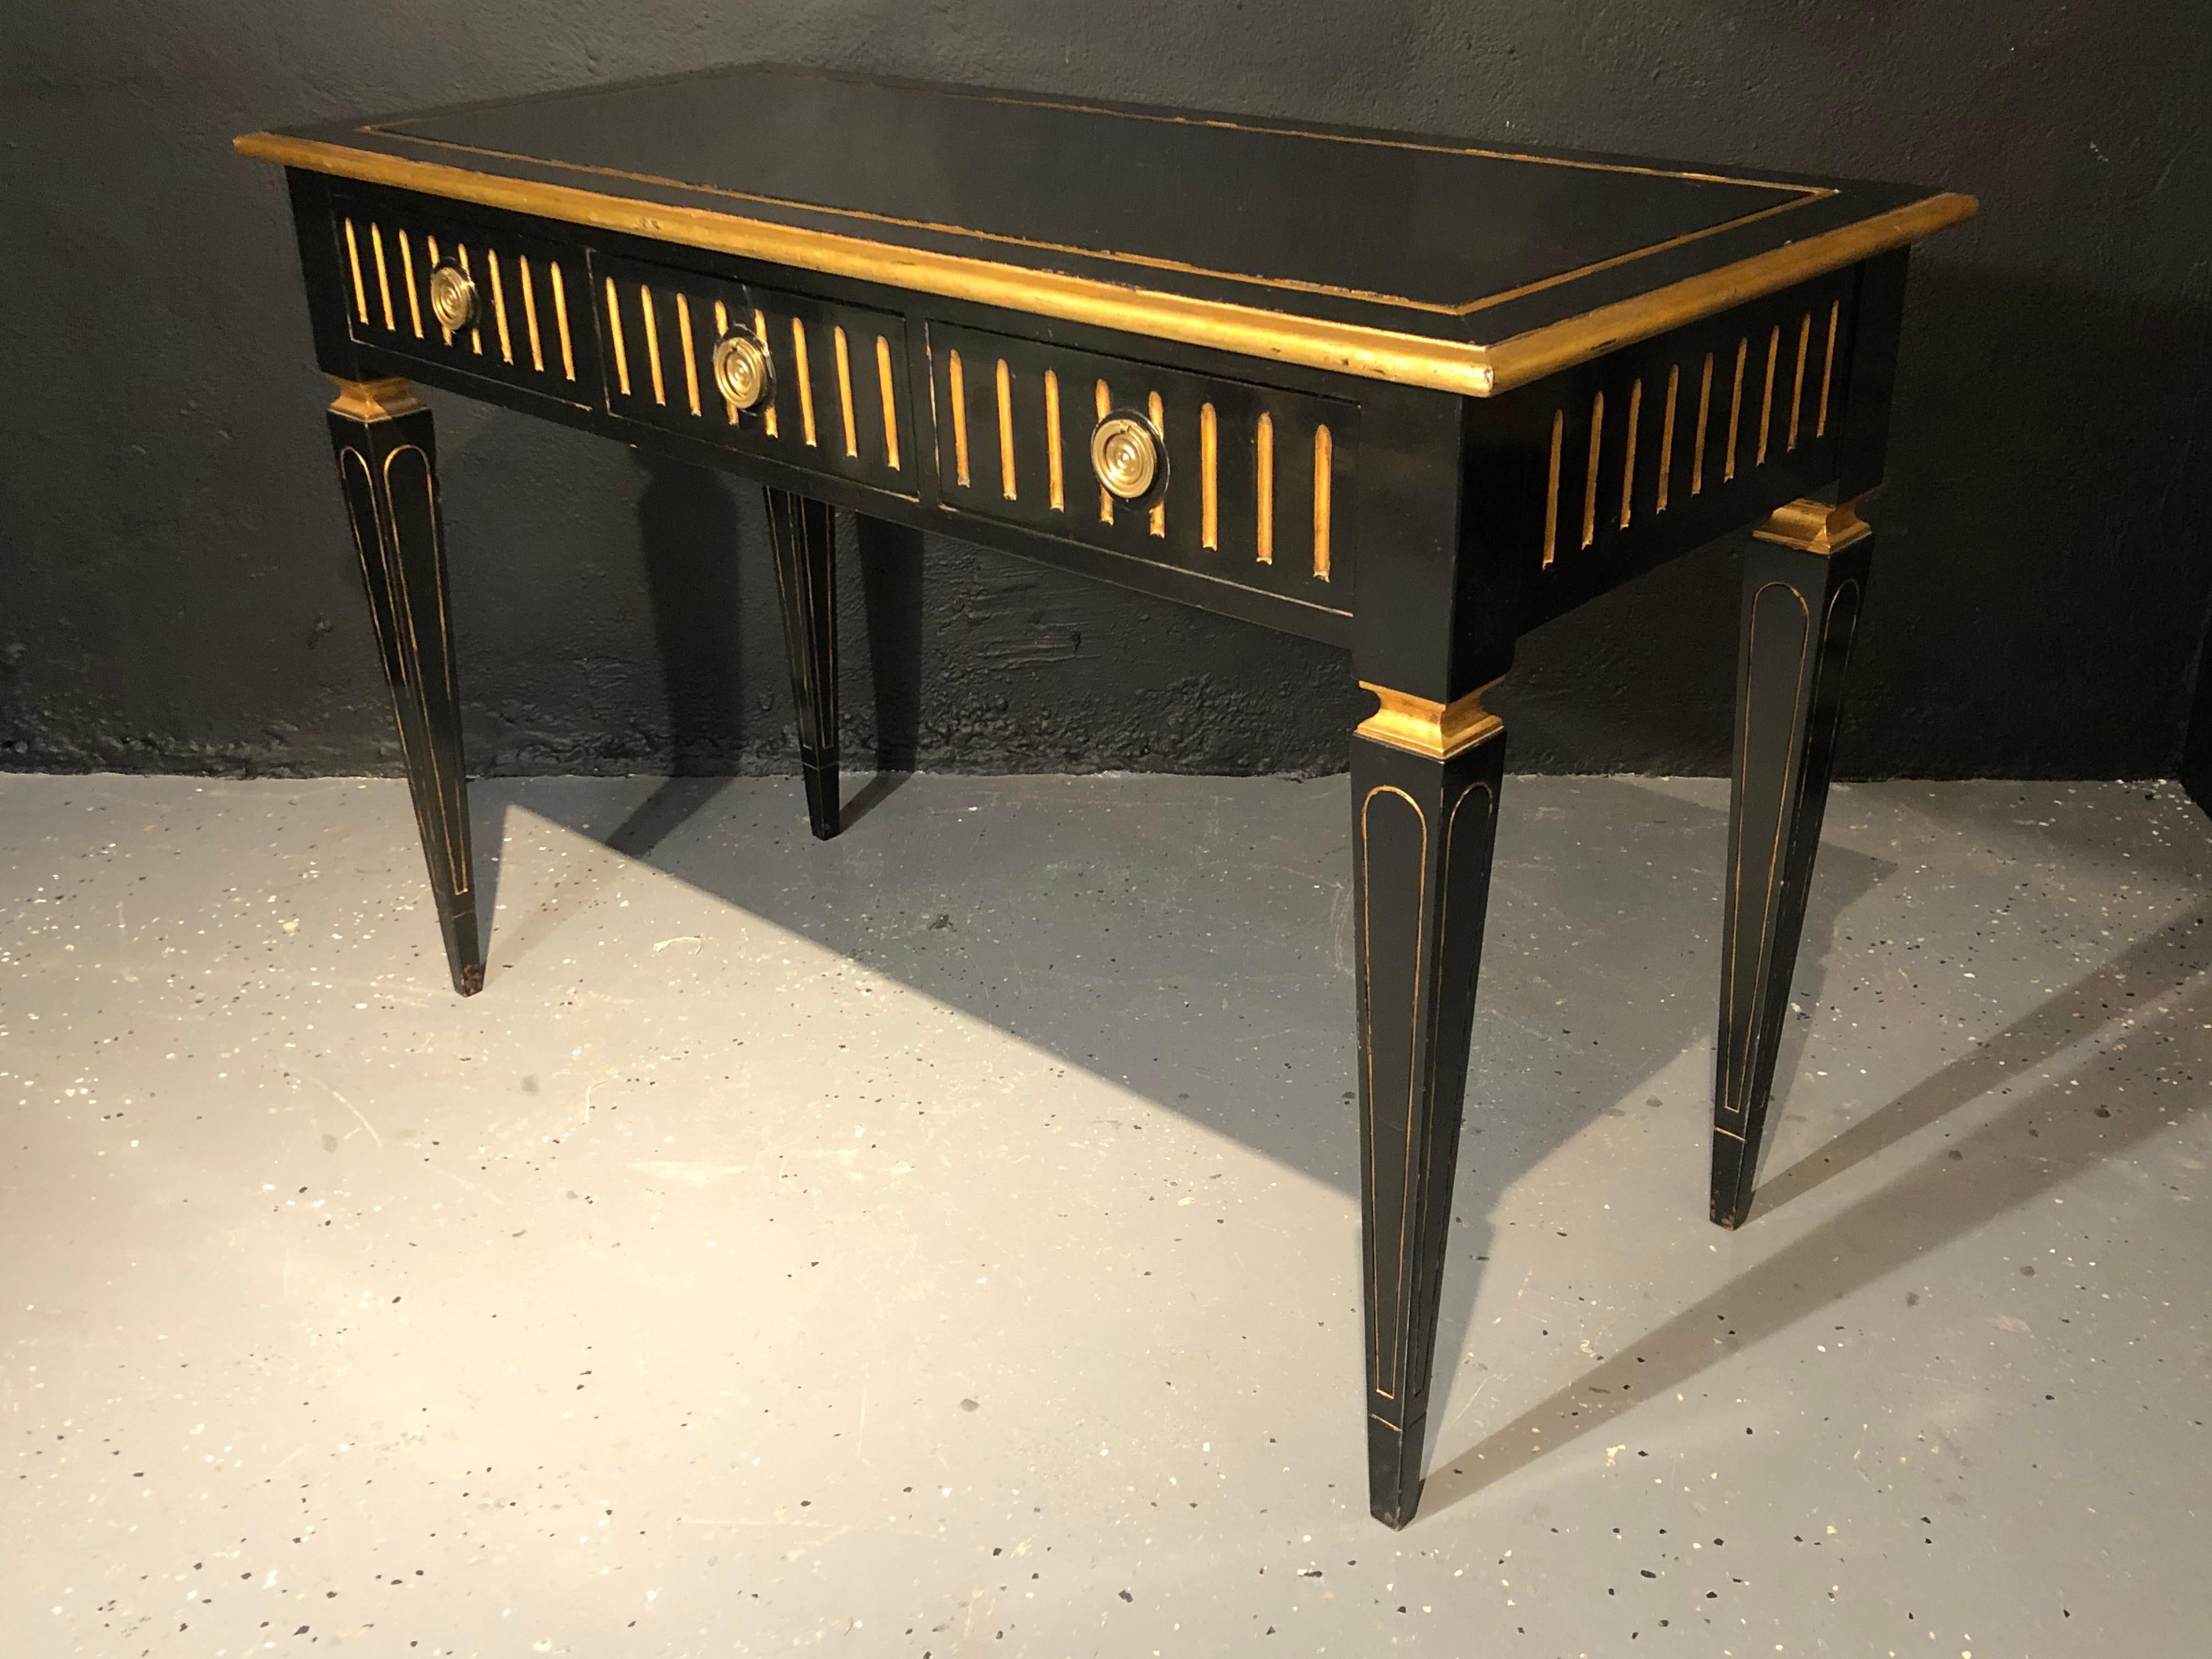 Ebony and gilt Hollywood Regency desk. An ebony and parcel-gilt decorated three drawer desk or writing table. This finely crafted desk by Maison Jansen sports a custom glass top sitting on a Fine ebony and parcel gilt decorated base having three